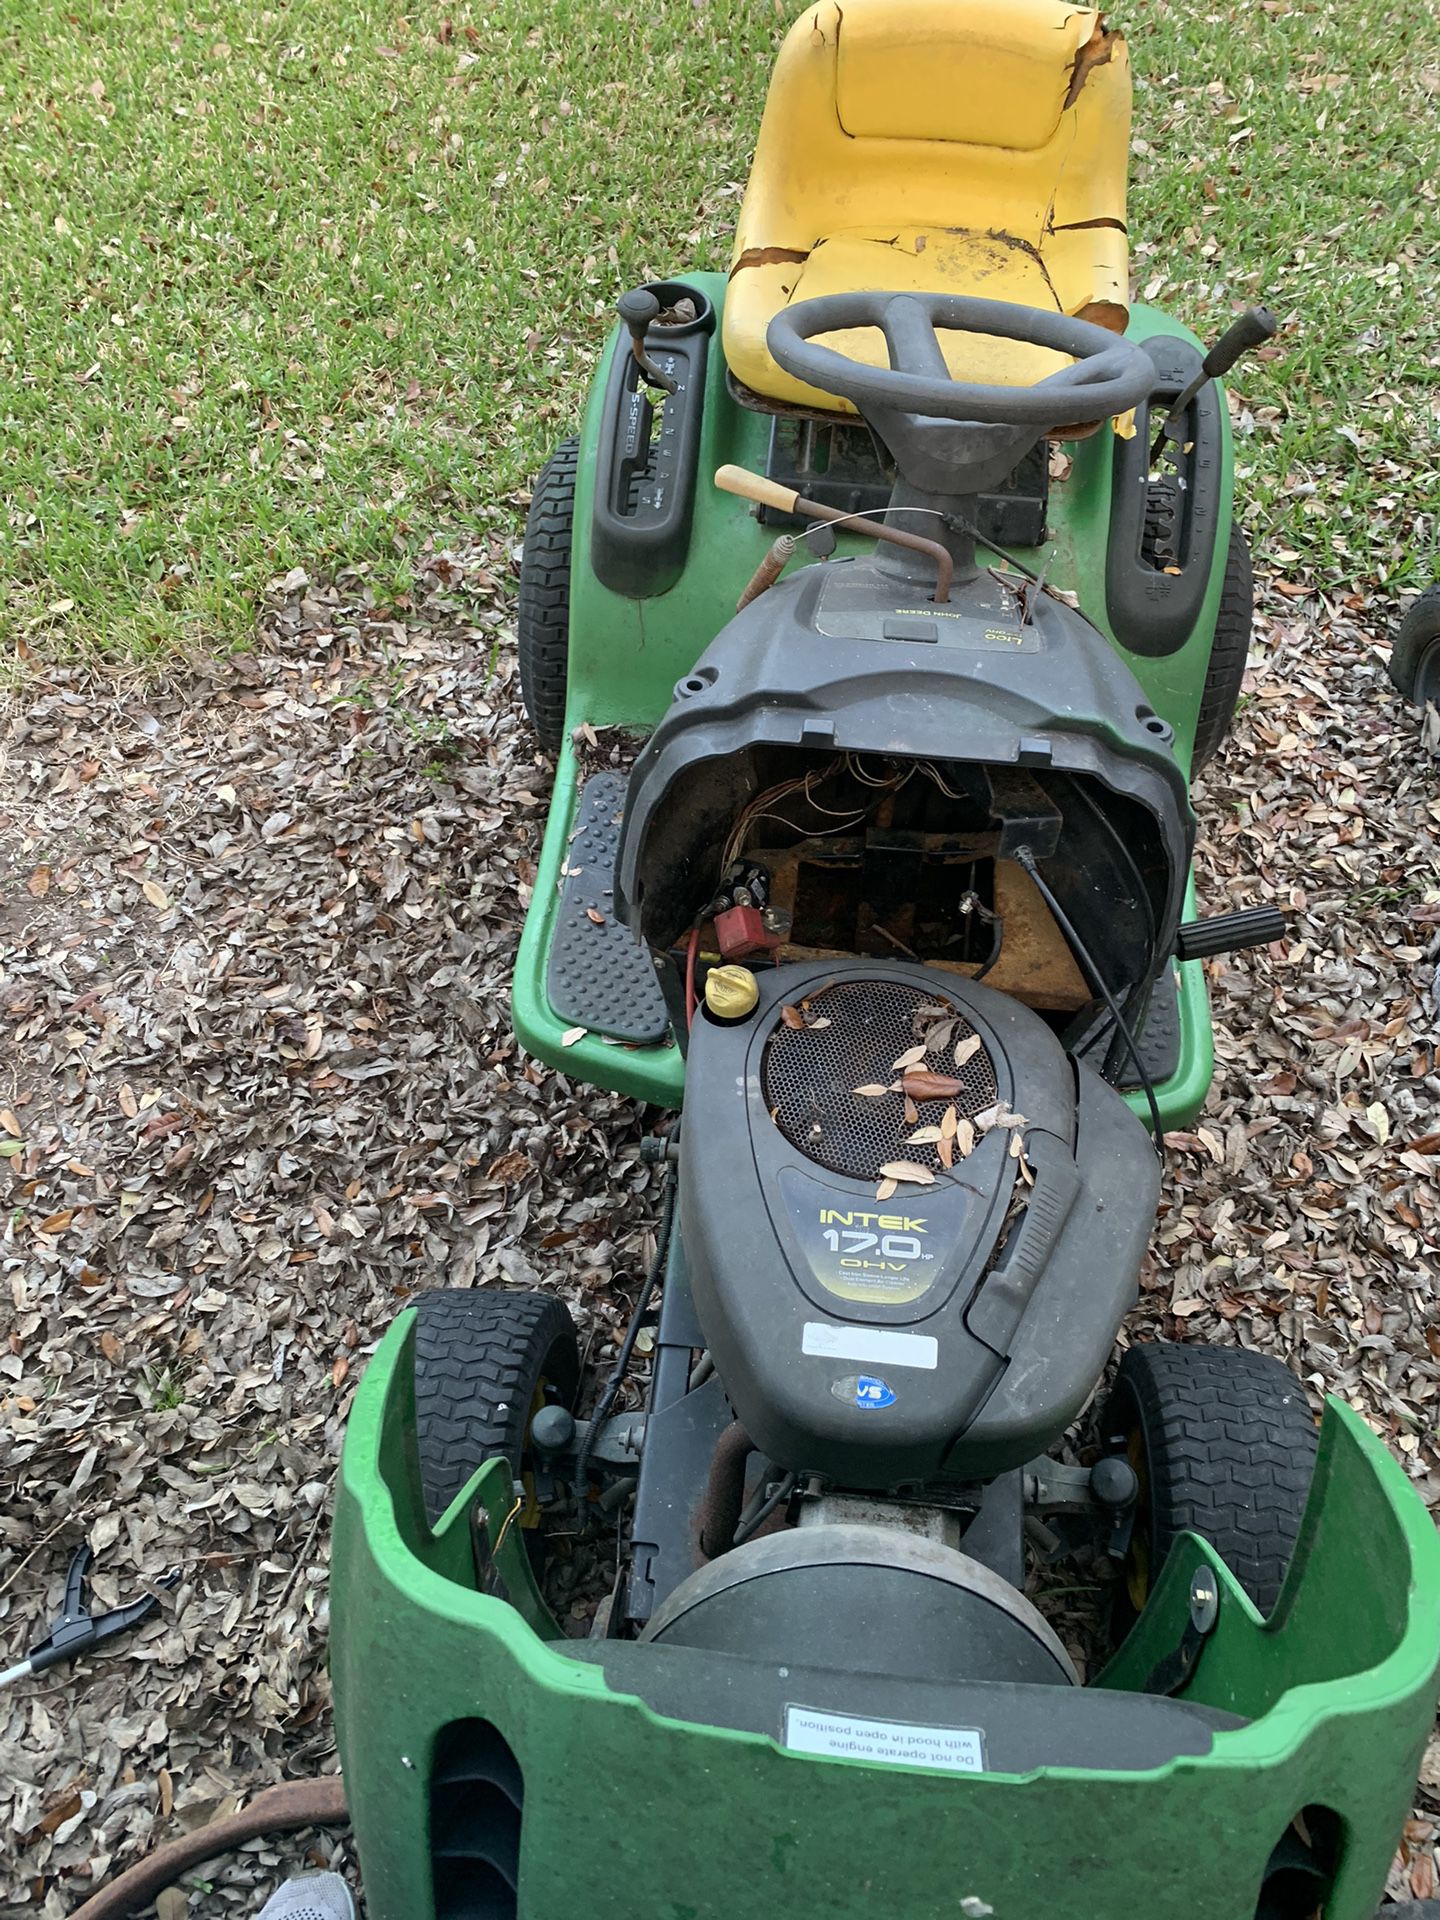 John Deer Riding Mower Selling As Is For Parts 